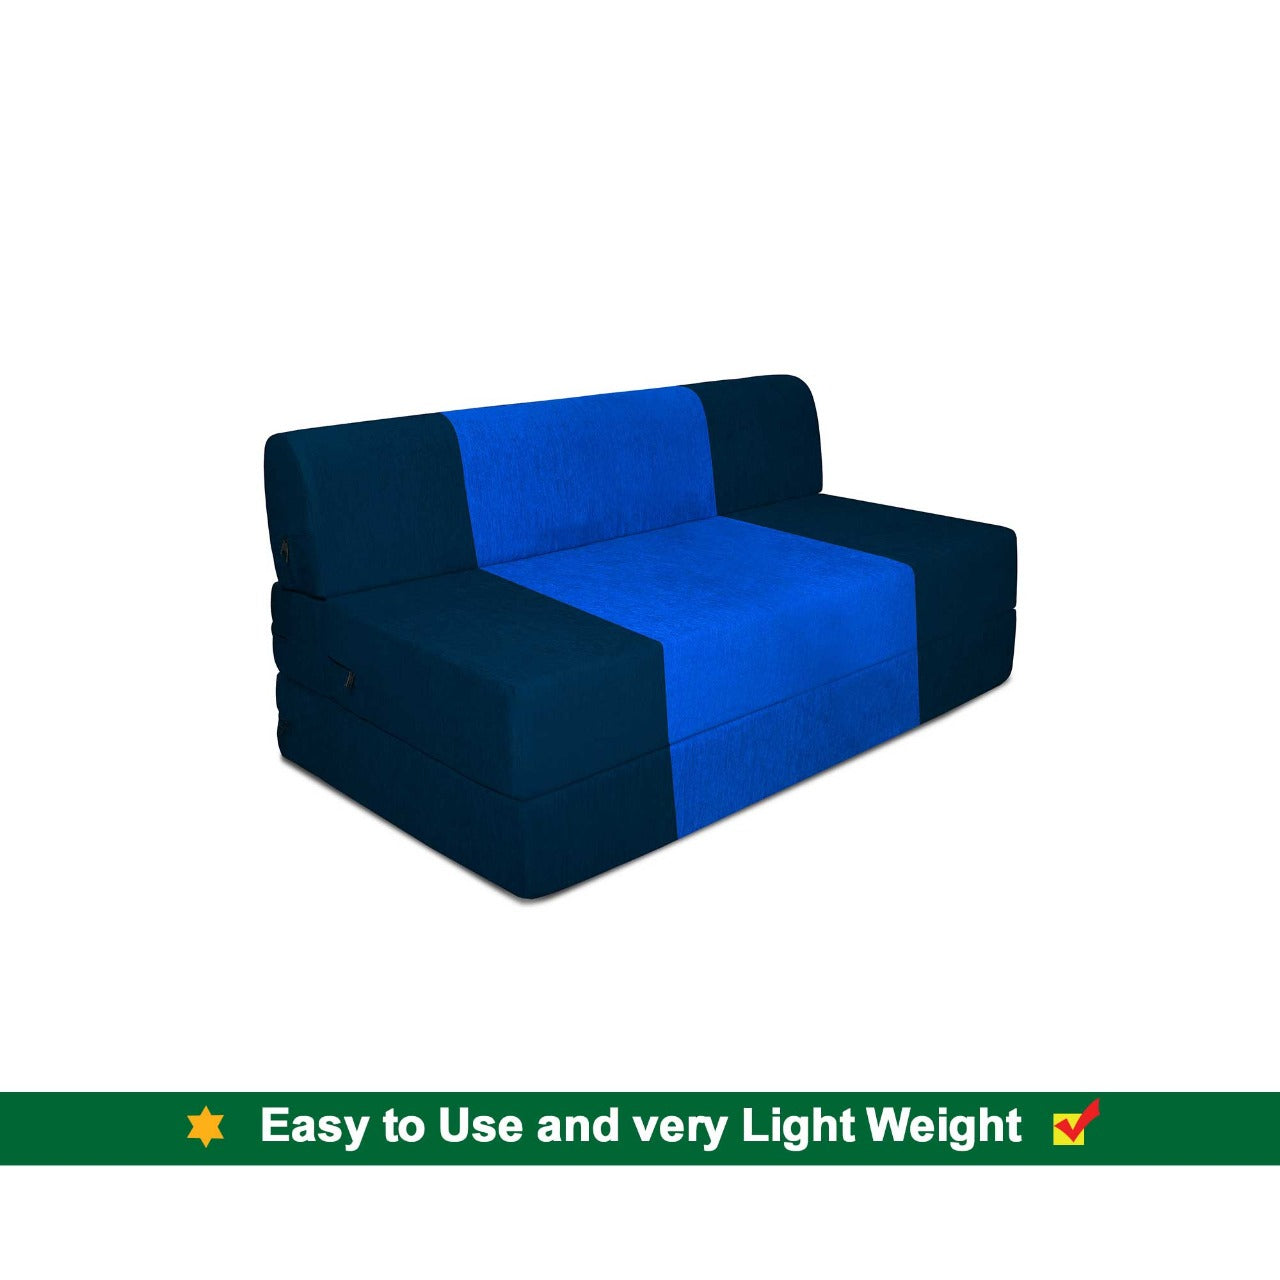 Sofa Cum Beds: 1 Seater Sofa Bed-N.Blue & R.Blue- 3ft x 6ft with Free micro fiber Designer cushions